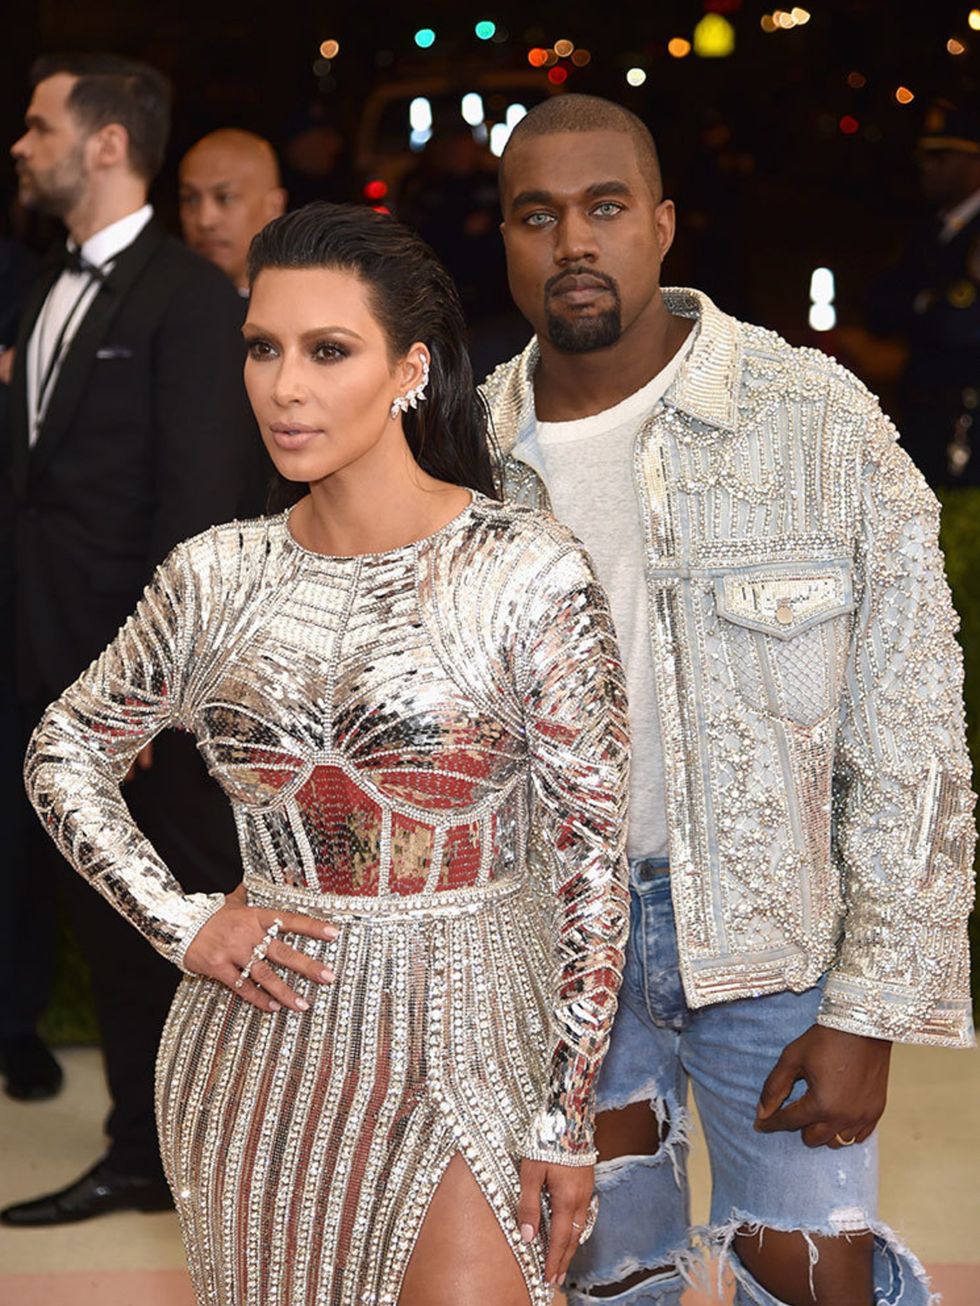 Kim Kardashian and Kanye West at the Met Gala in New York, May 2016.